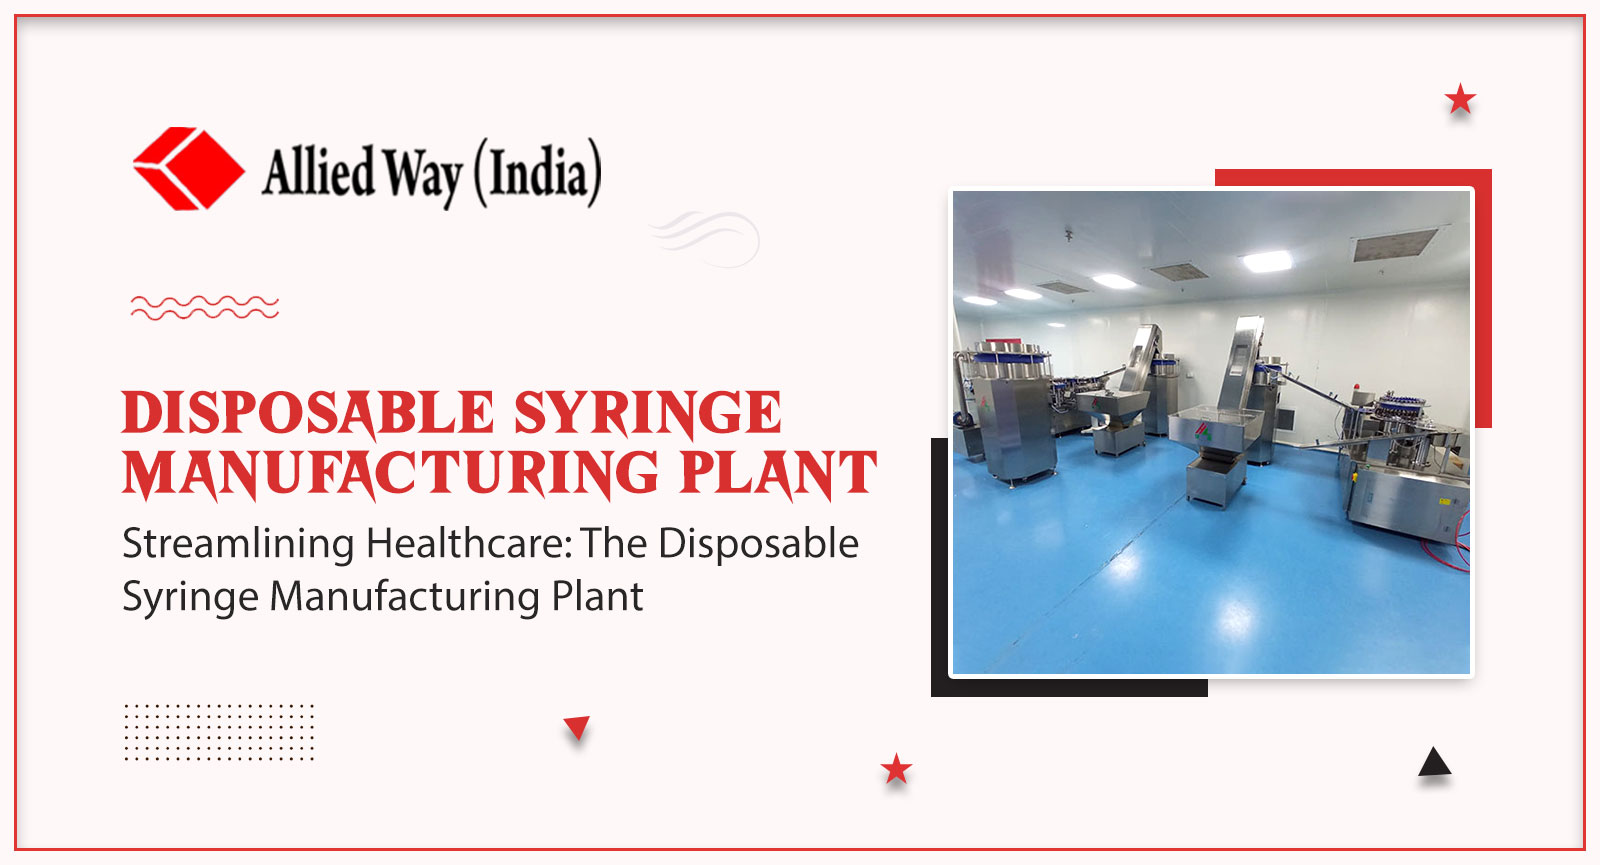 Streamlining Healthcare: The Disposable Syringe Manufacturing Plant, Allied Way (India)